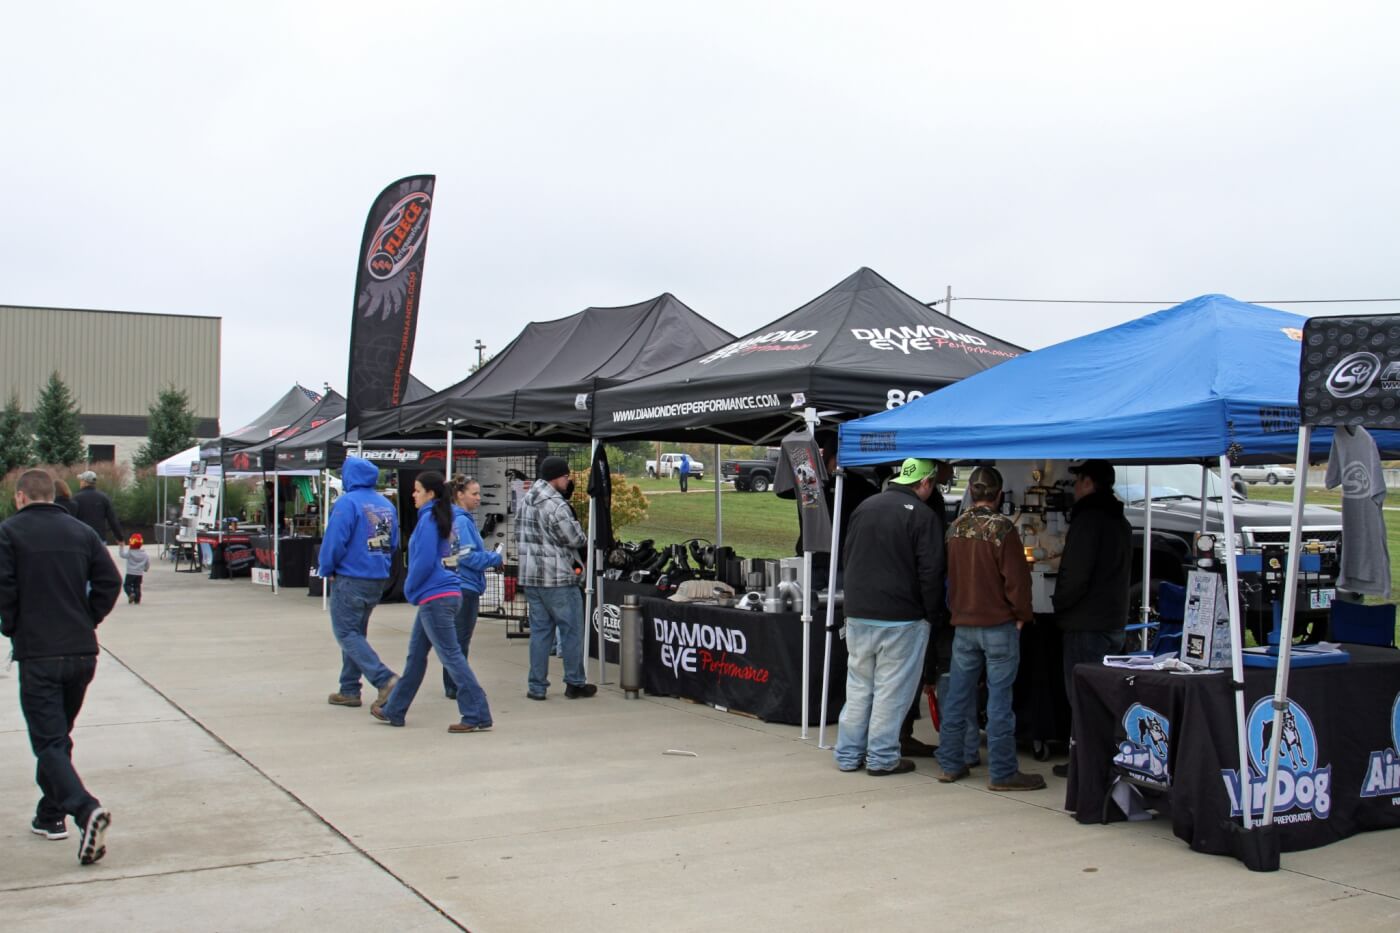 Manufacturers had display booths setup ringing the Thoroughbred parking lot with products on display and representatives to answer questions.